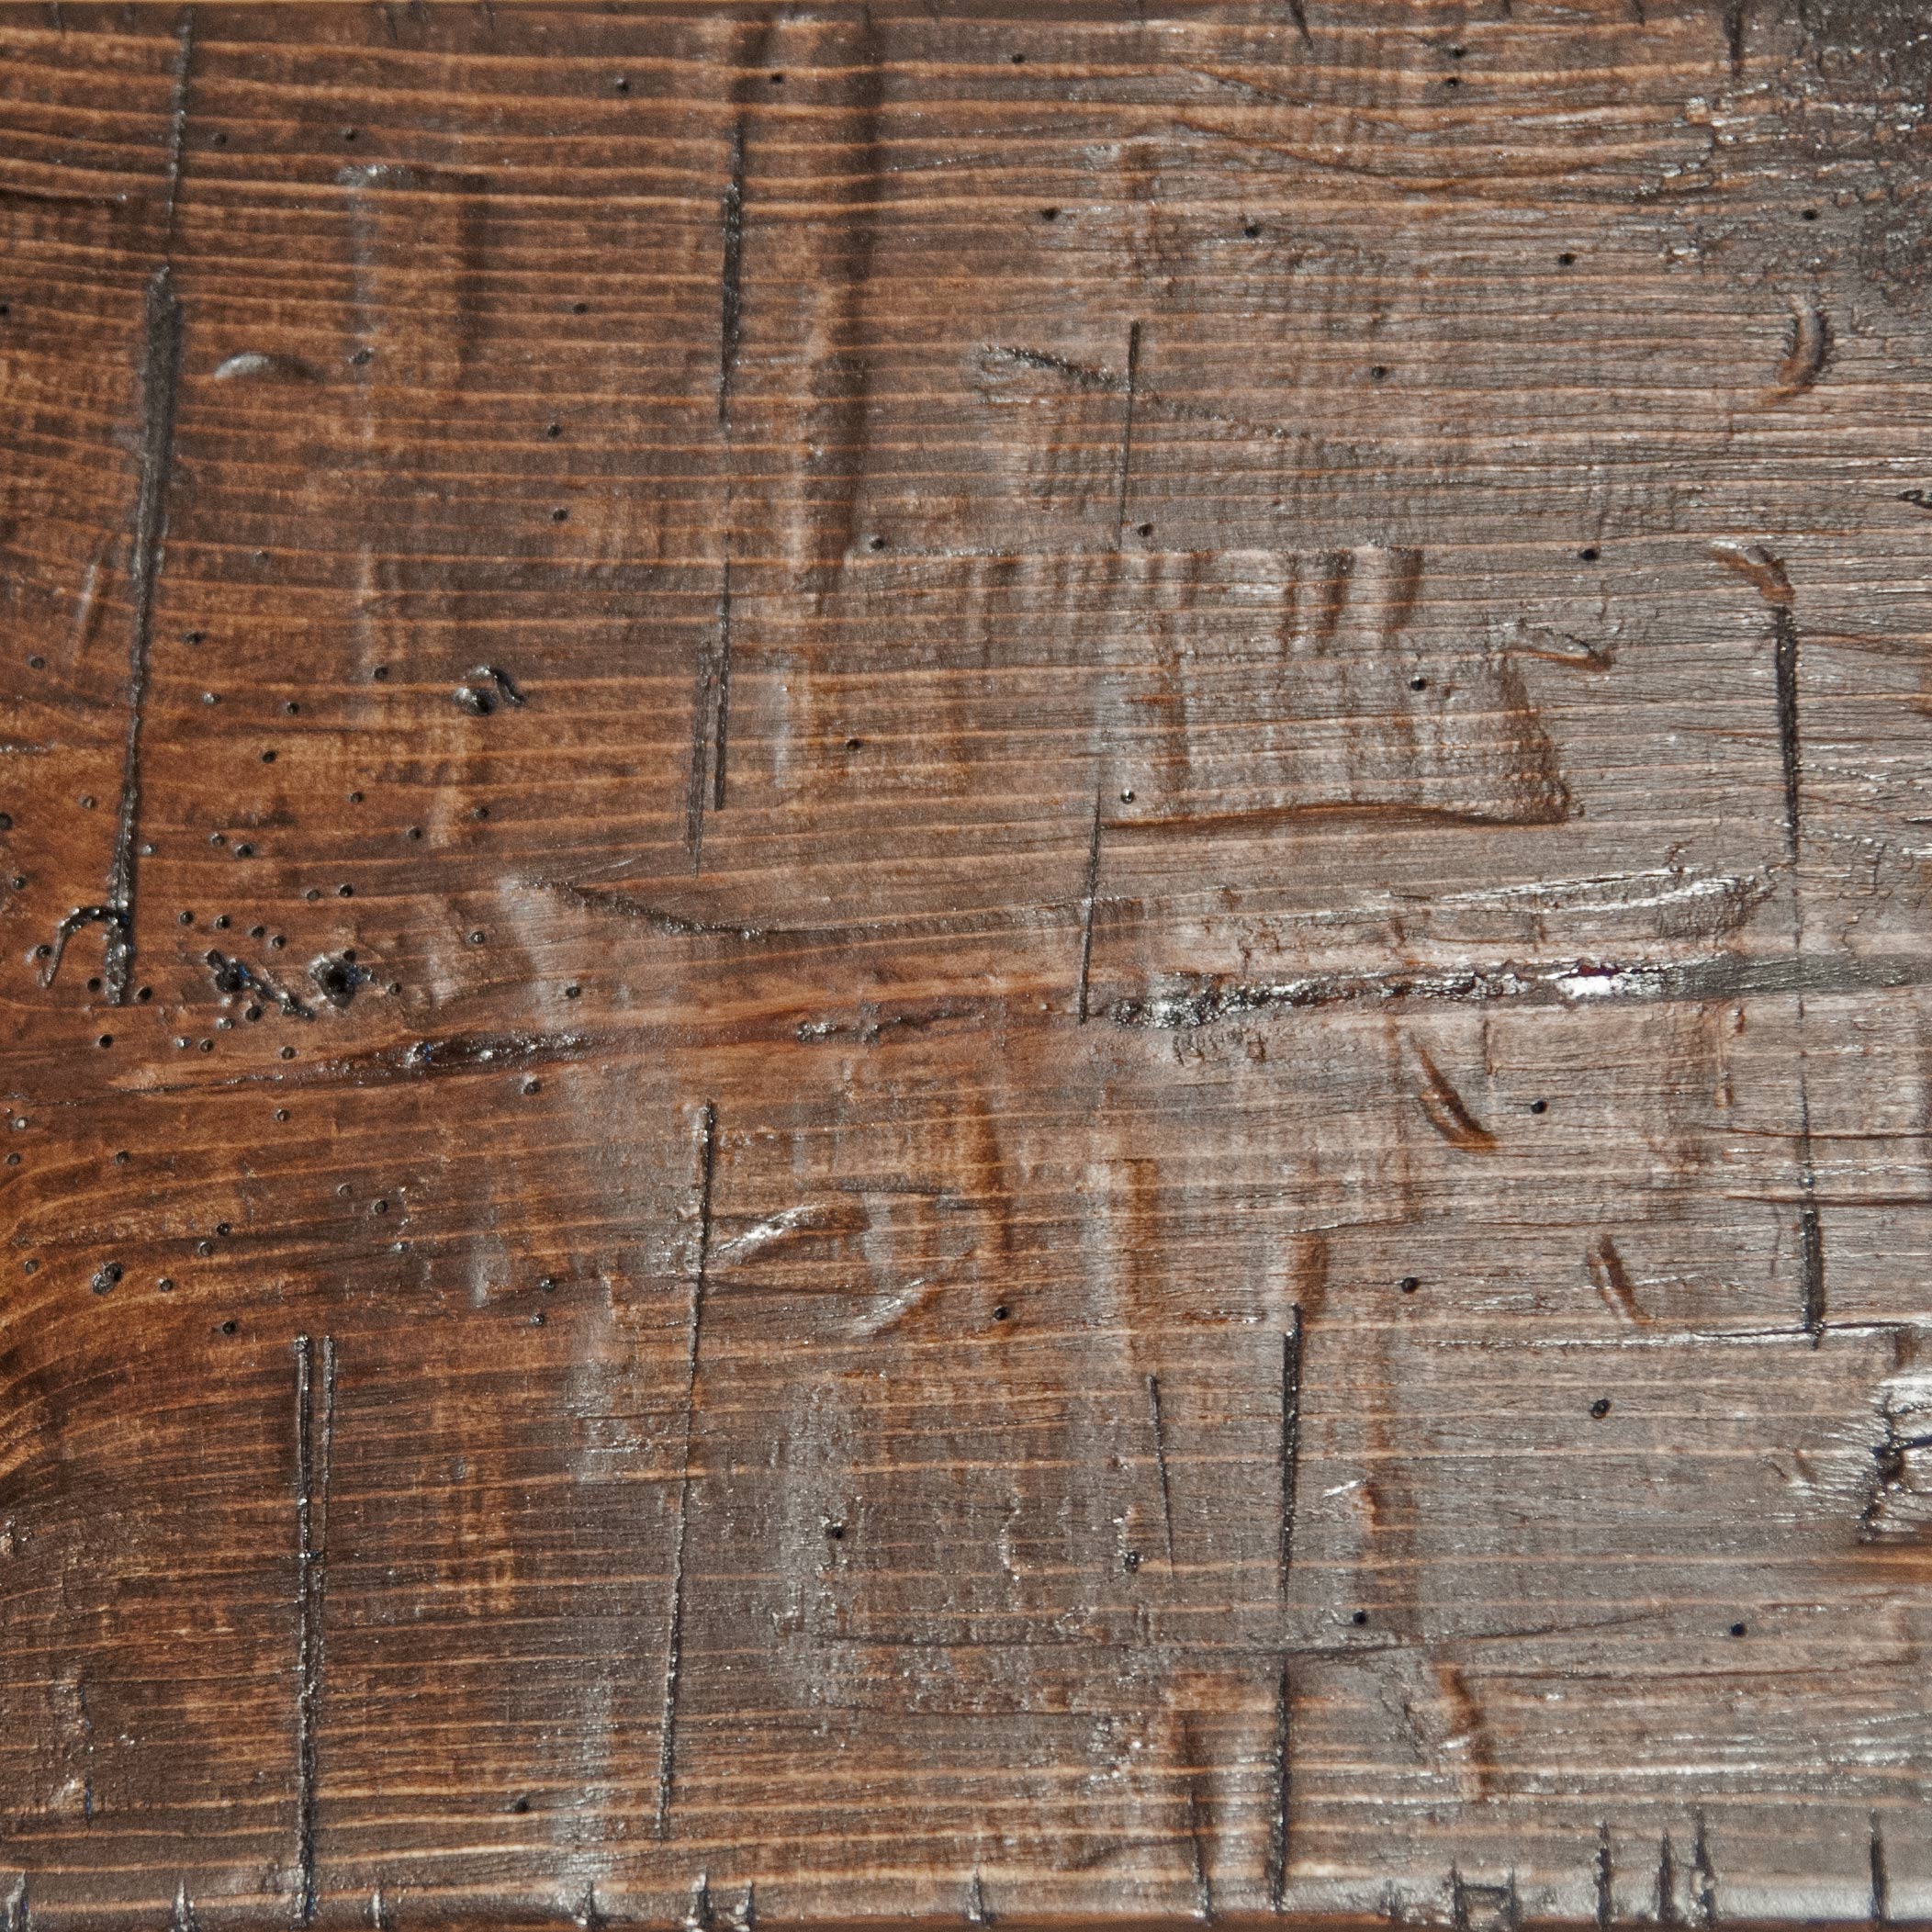 How to Make New Wood Look Old: How to Make Distressed Wood